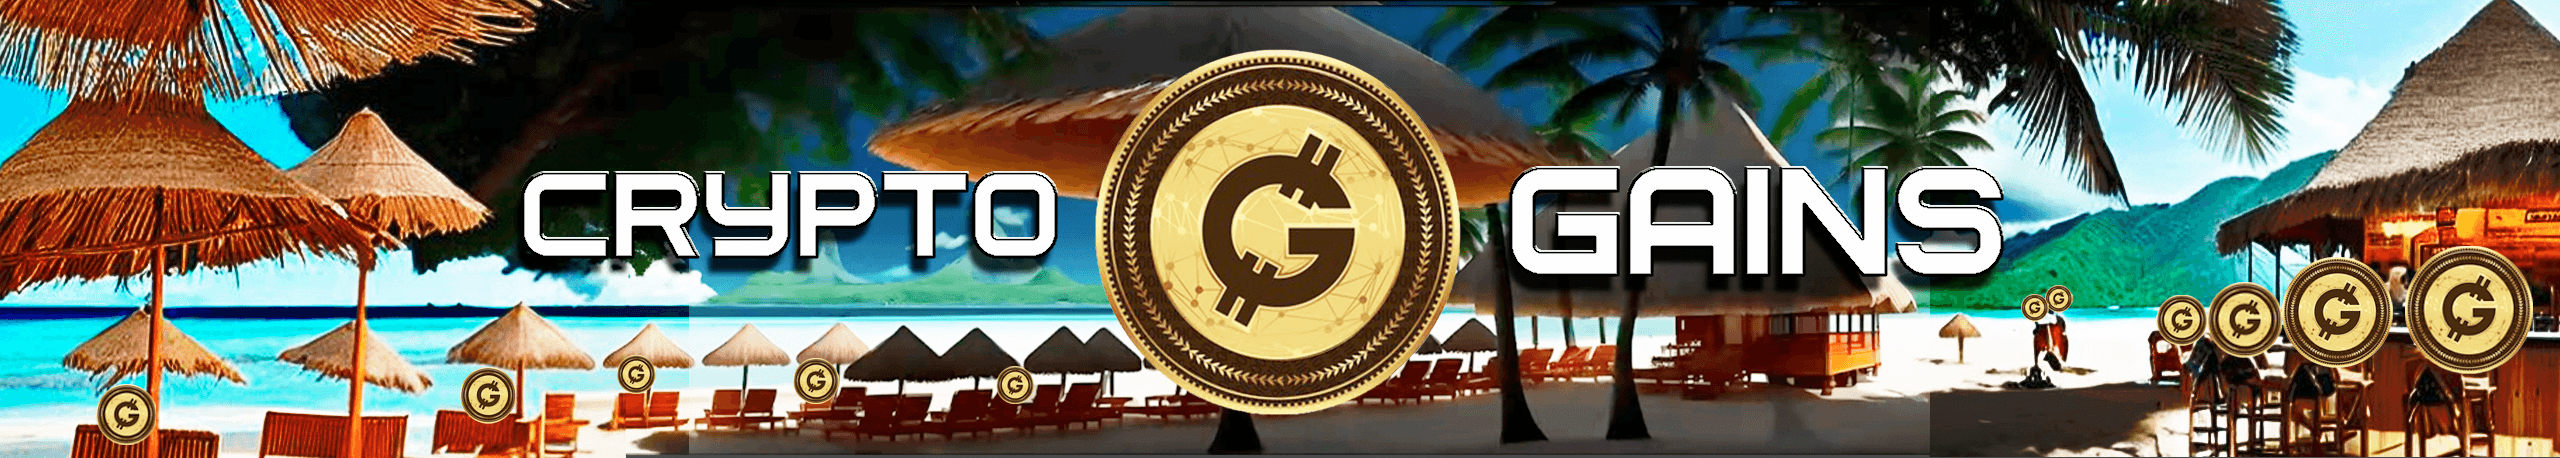 CryptoGains banner